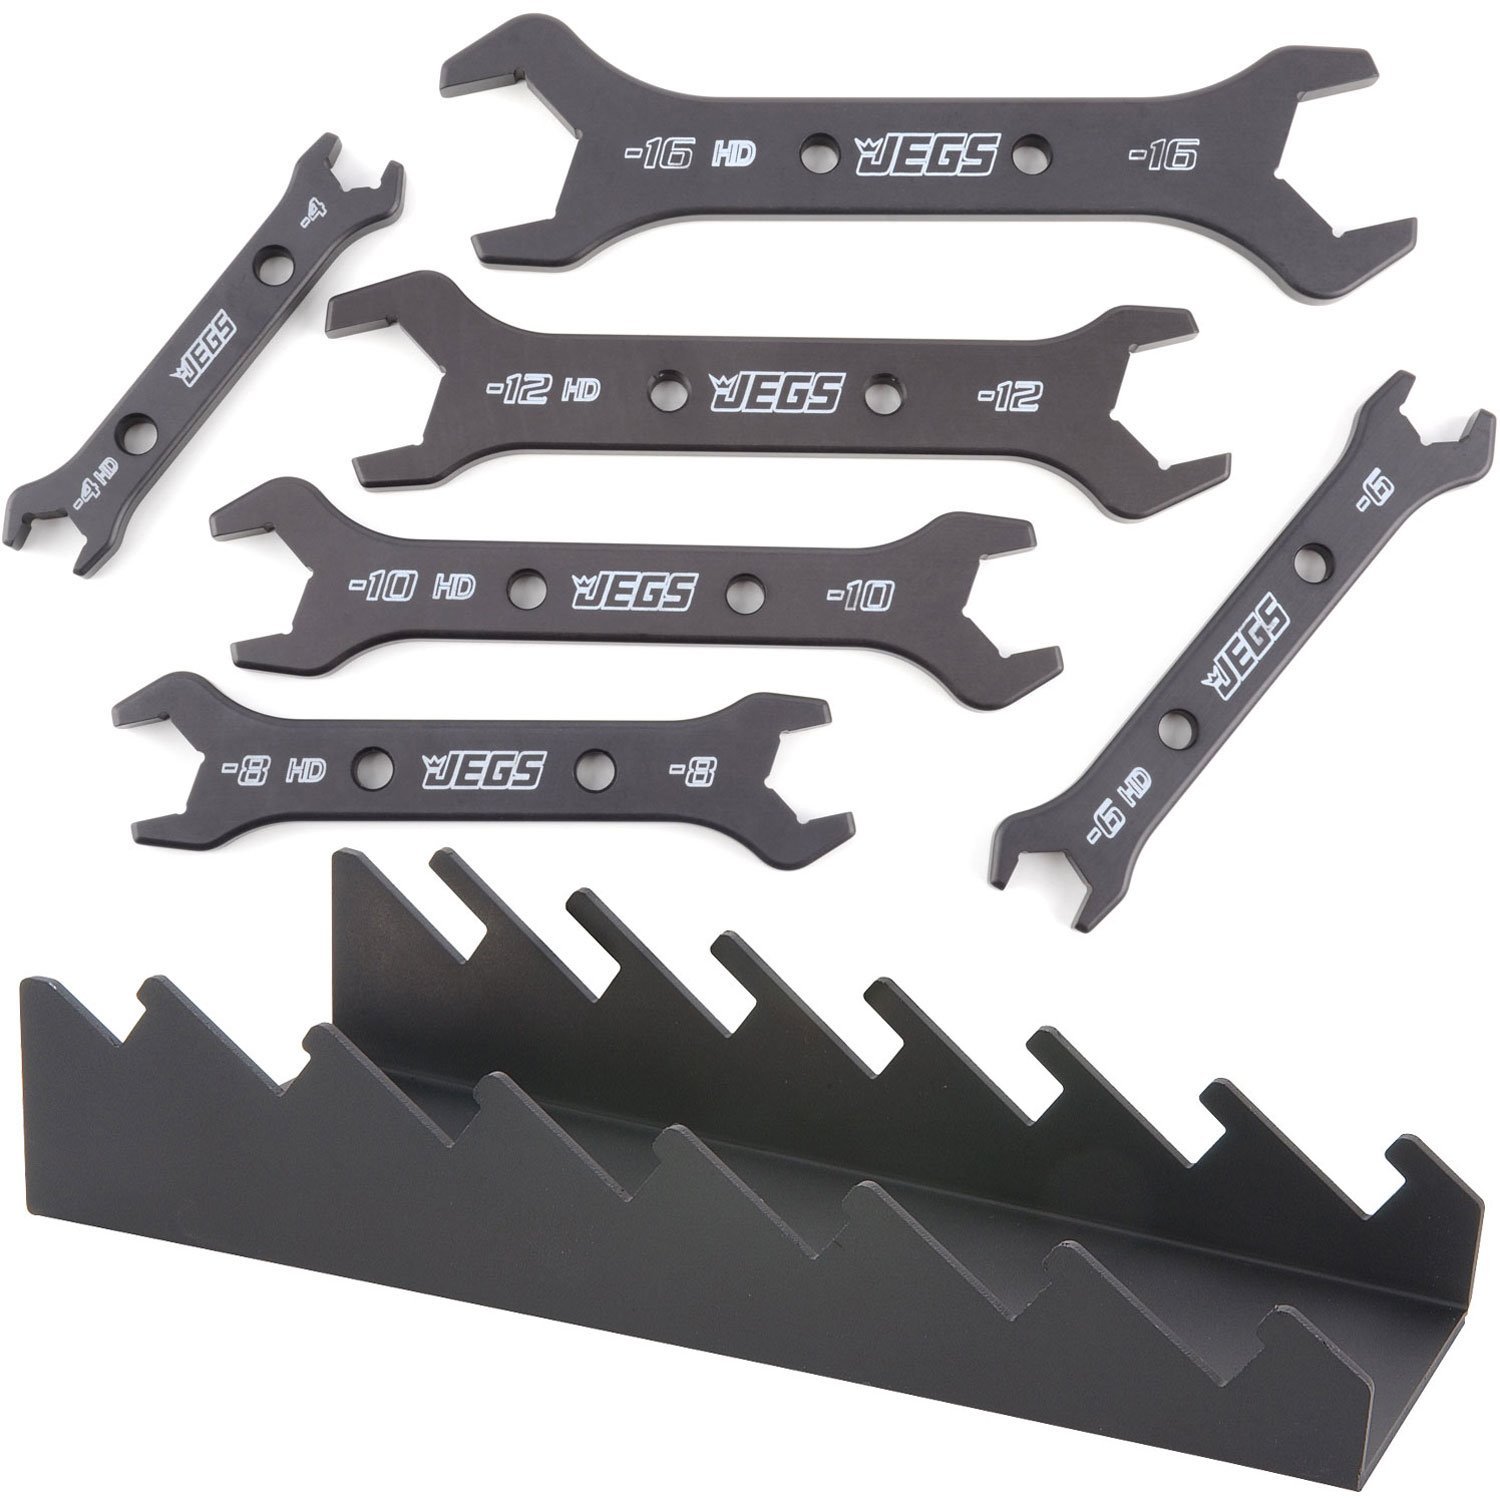 AN Combination Wrench Set with Wrench Rack